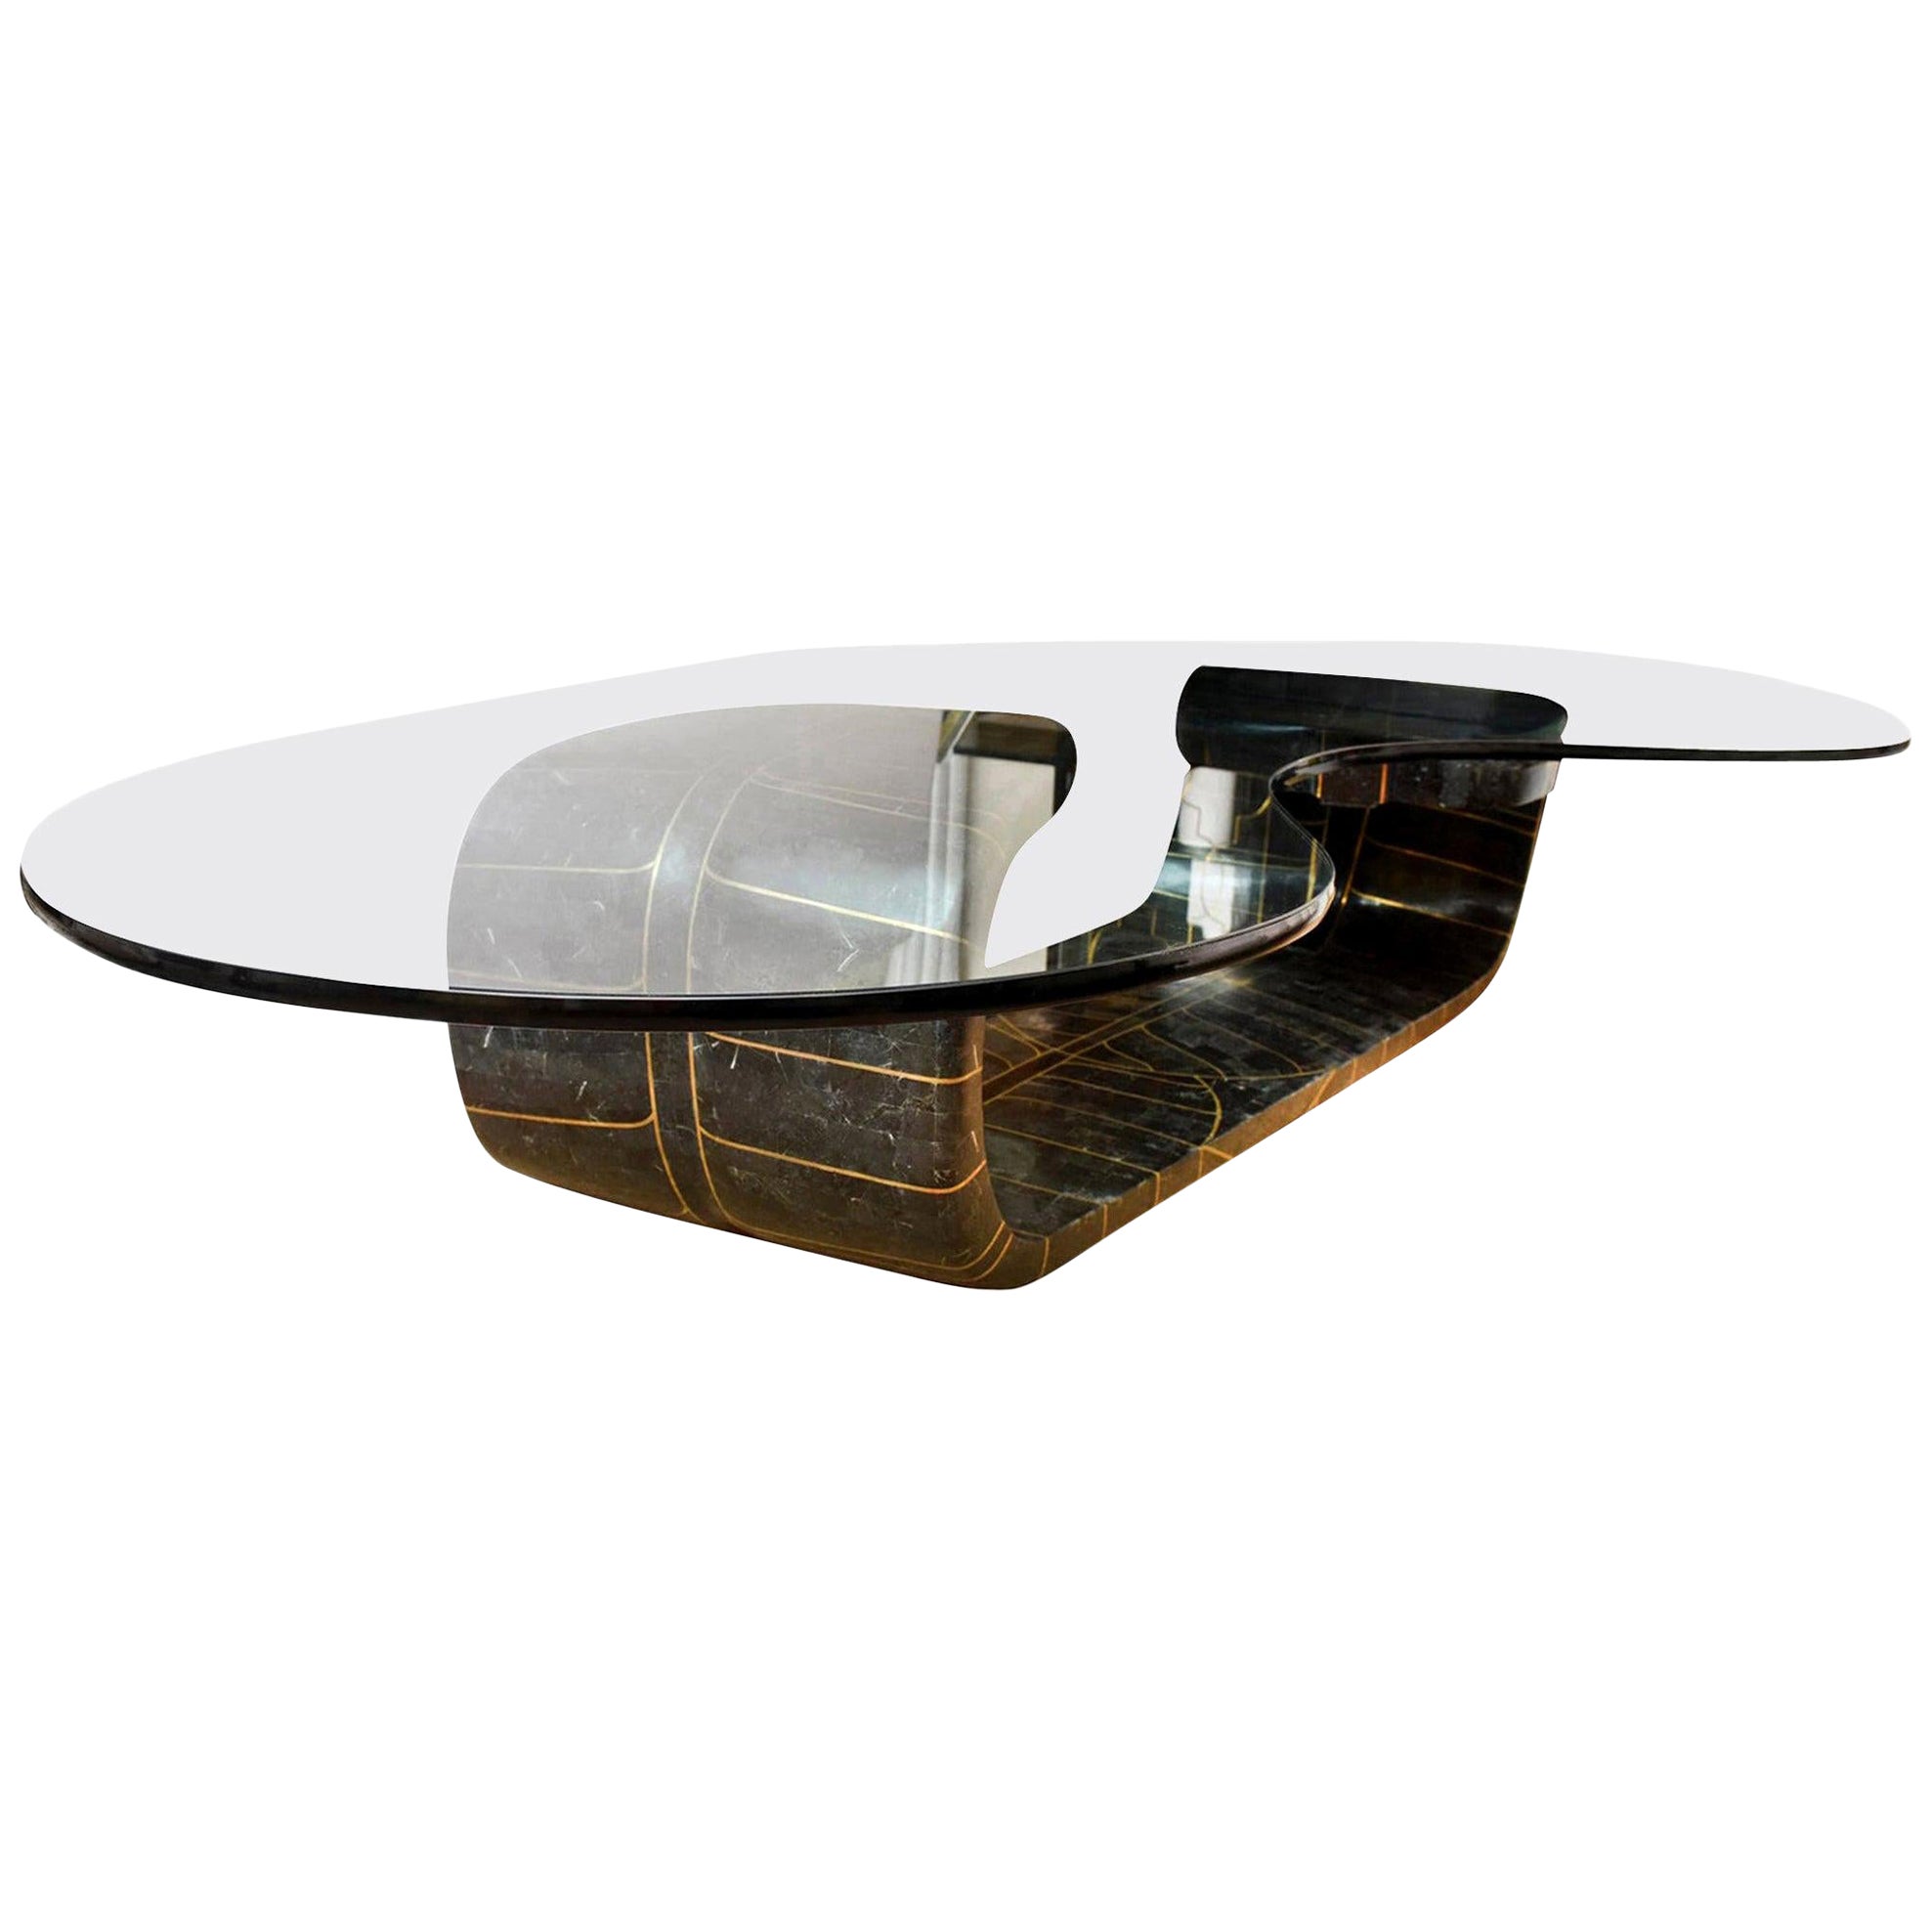 Biomorphic Tessellated Black Stone and Inlaid Brass Sculptural Cocktail Table